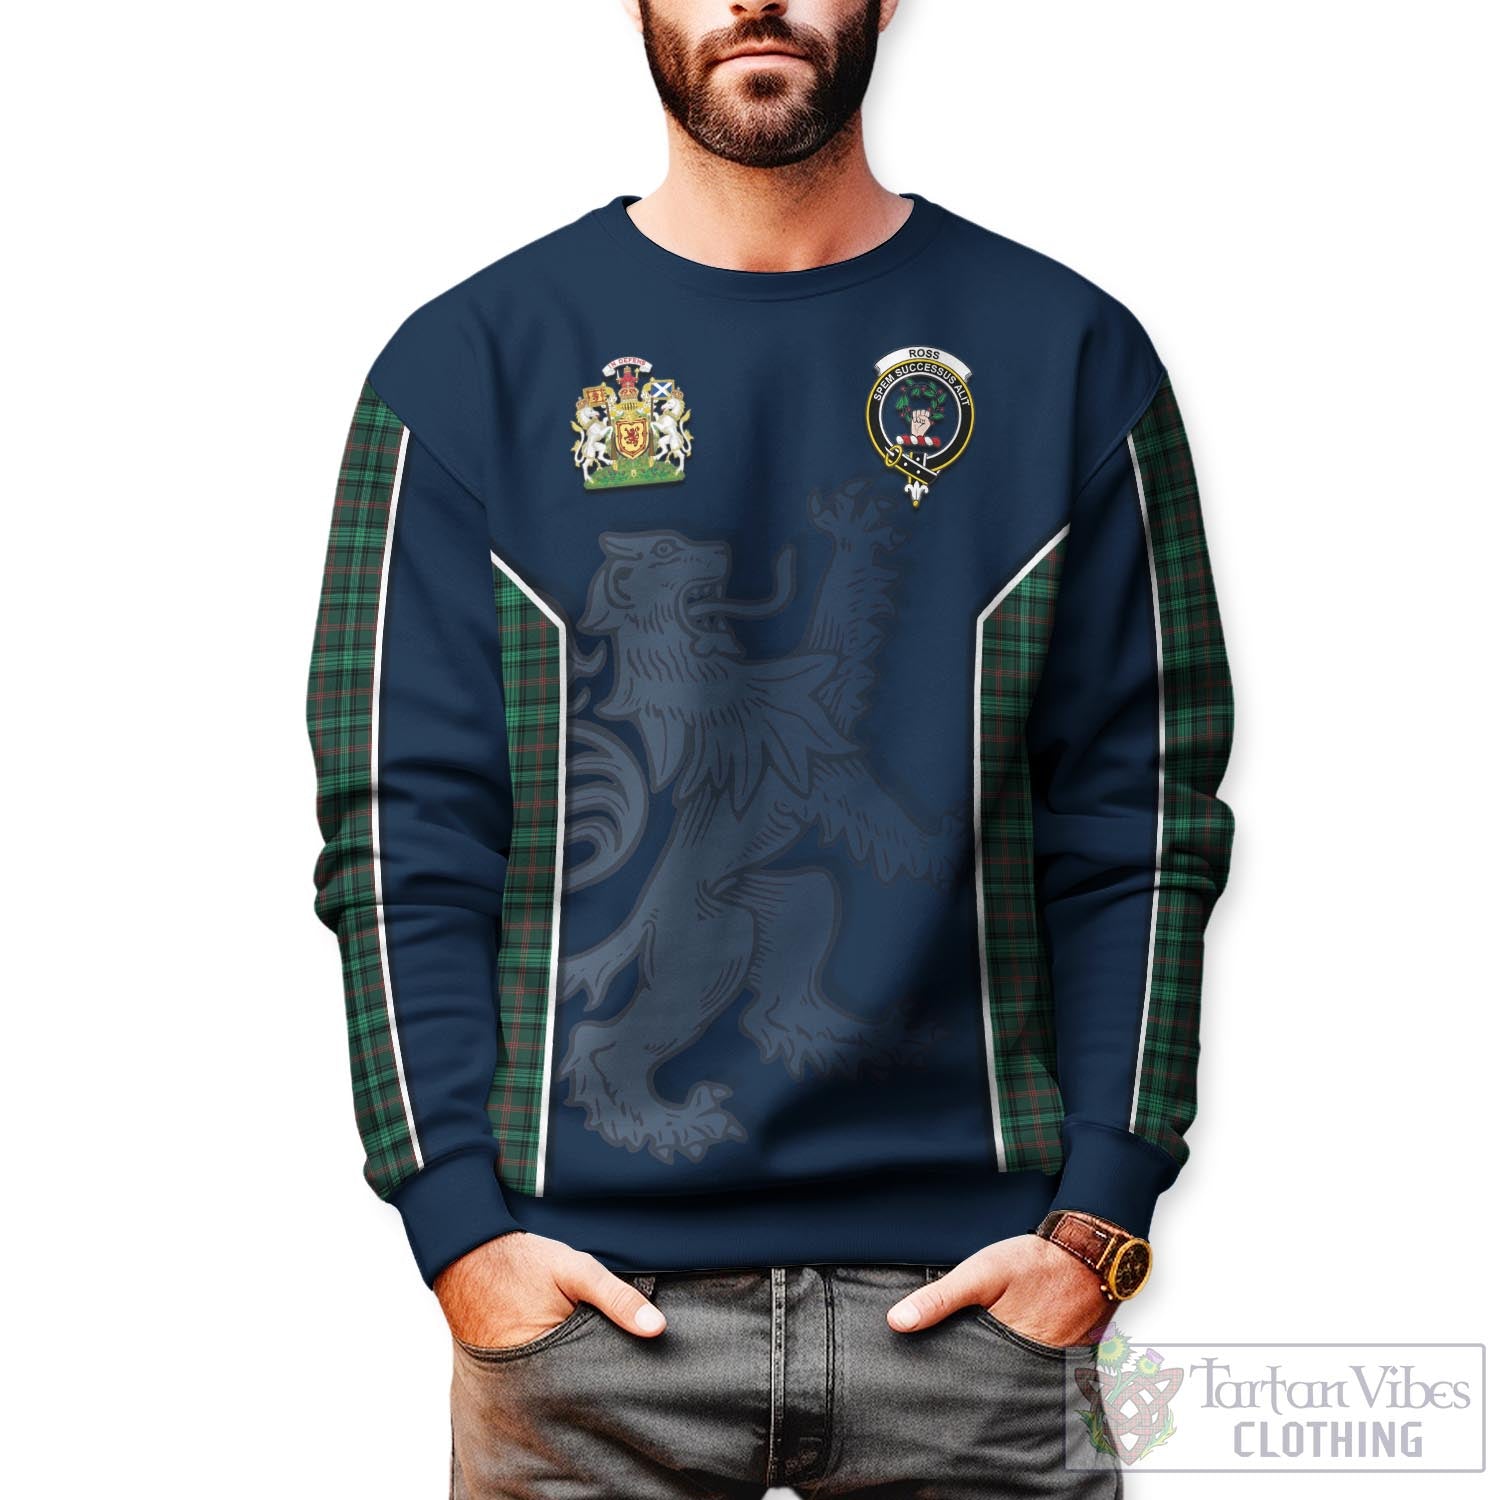 Tartan Vibes Clothing Ross Hunting Modern Tartan Sweater with Family Crest and Lion Rampant Vibes Sport Style